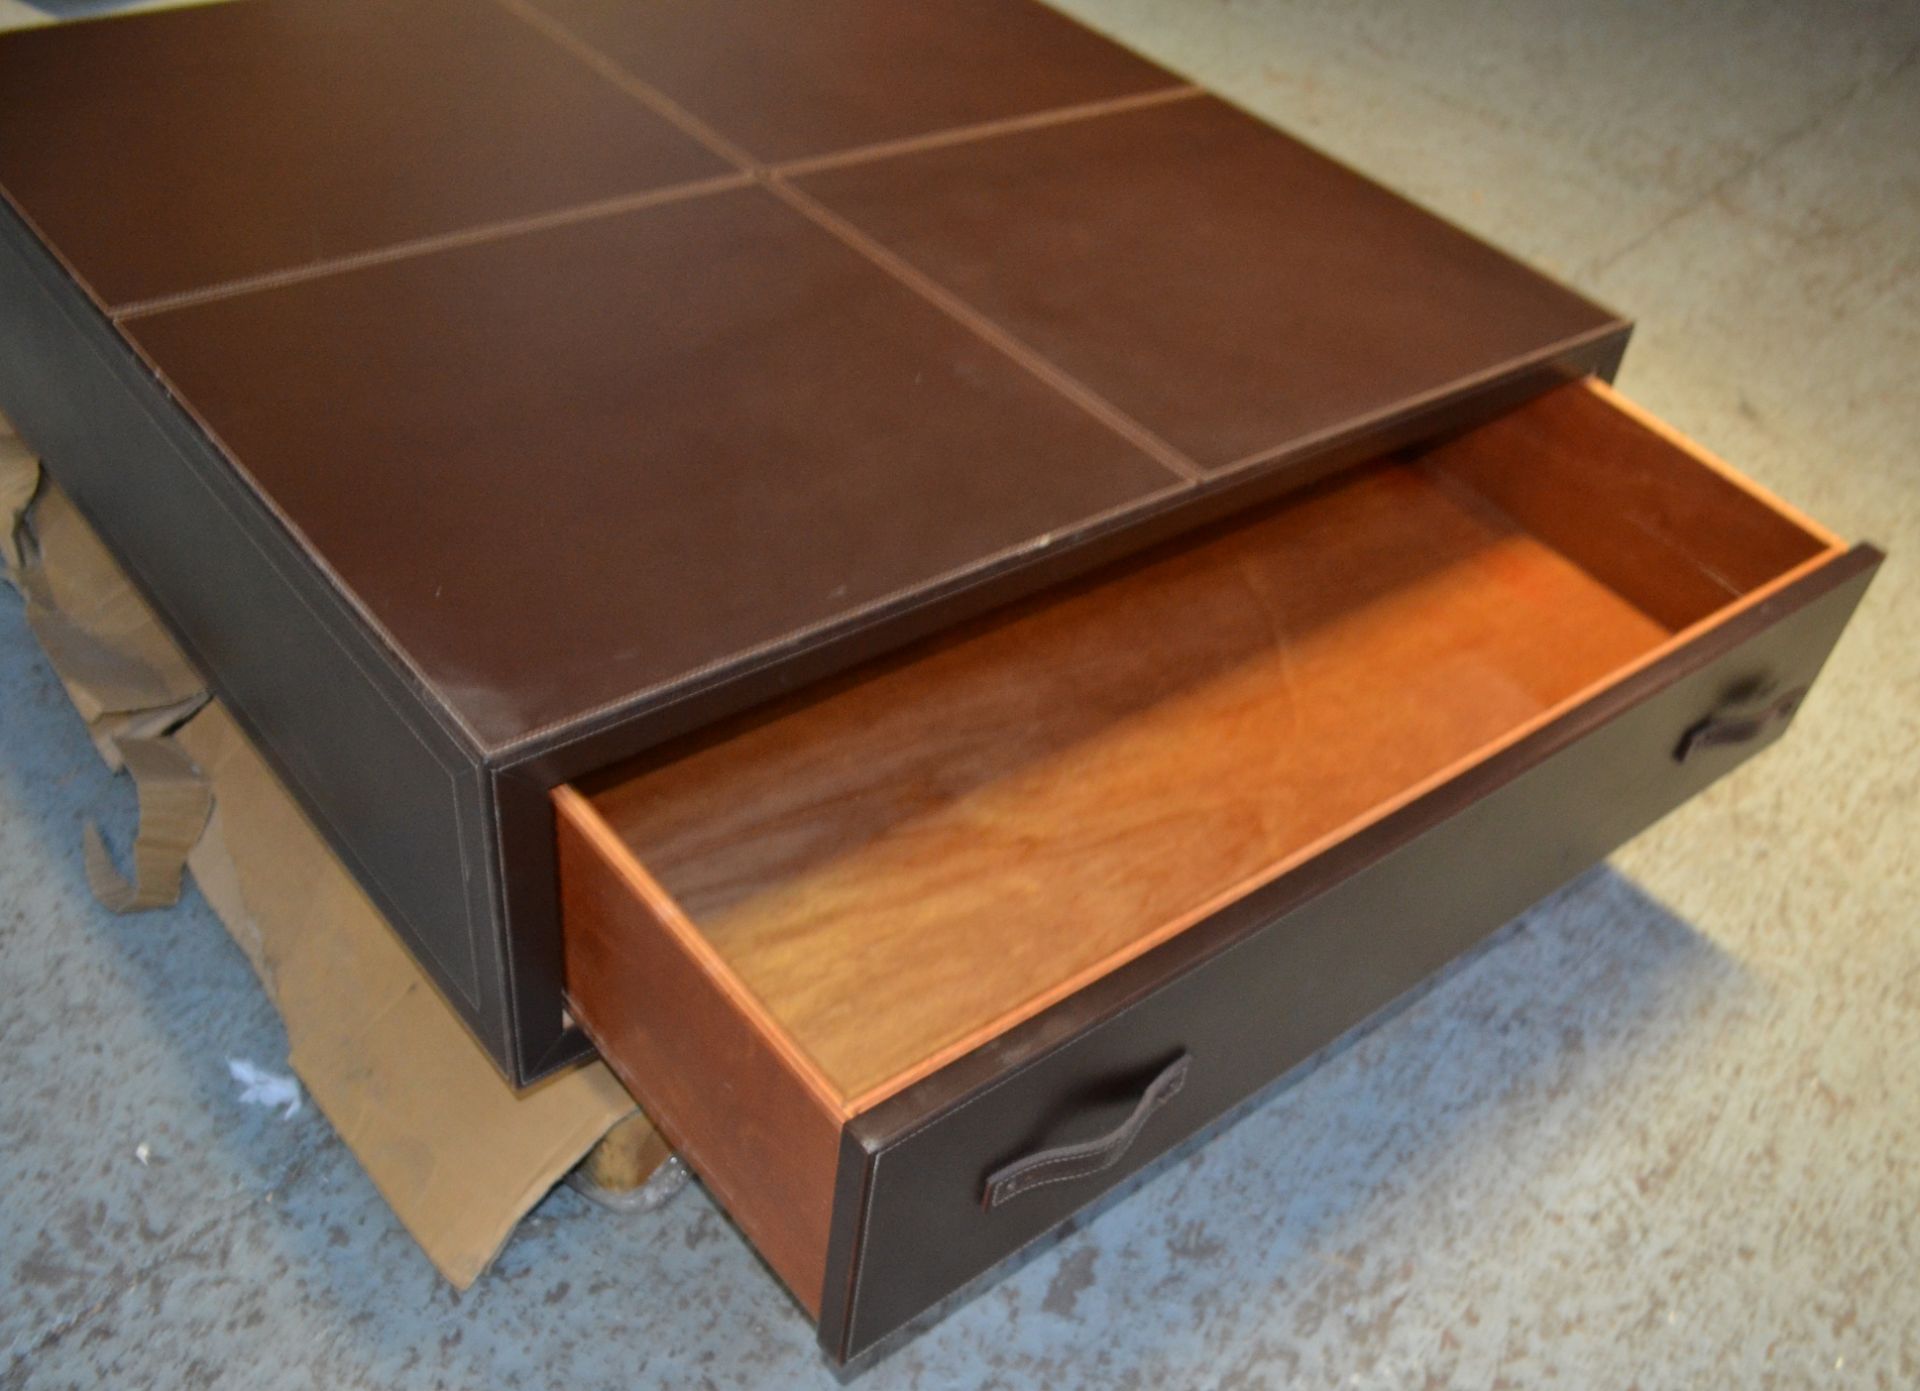 1 x Large Brown Leather Clad Coffee Table With 2-Drawer Storage - Dimensions: 120 x 120 x H31cm - CL - Image 9 of 11